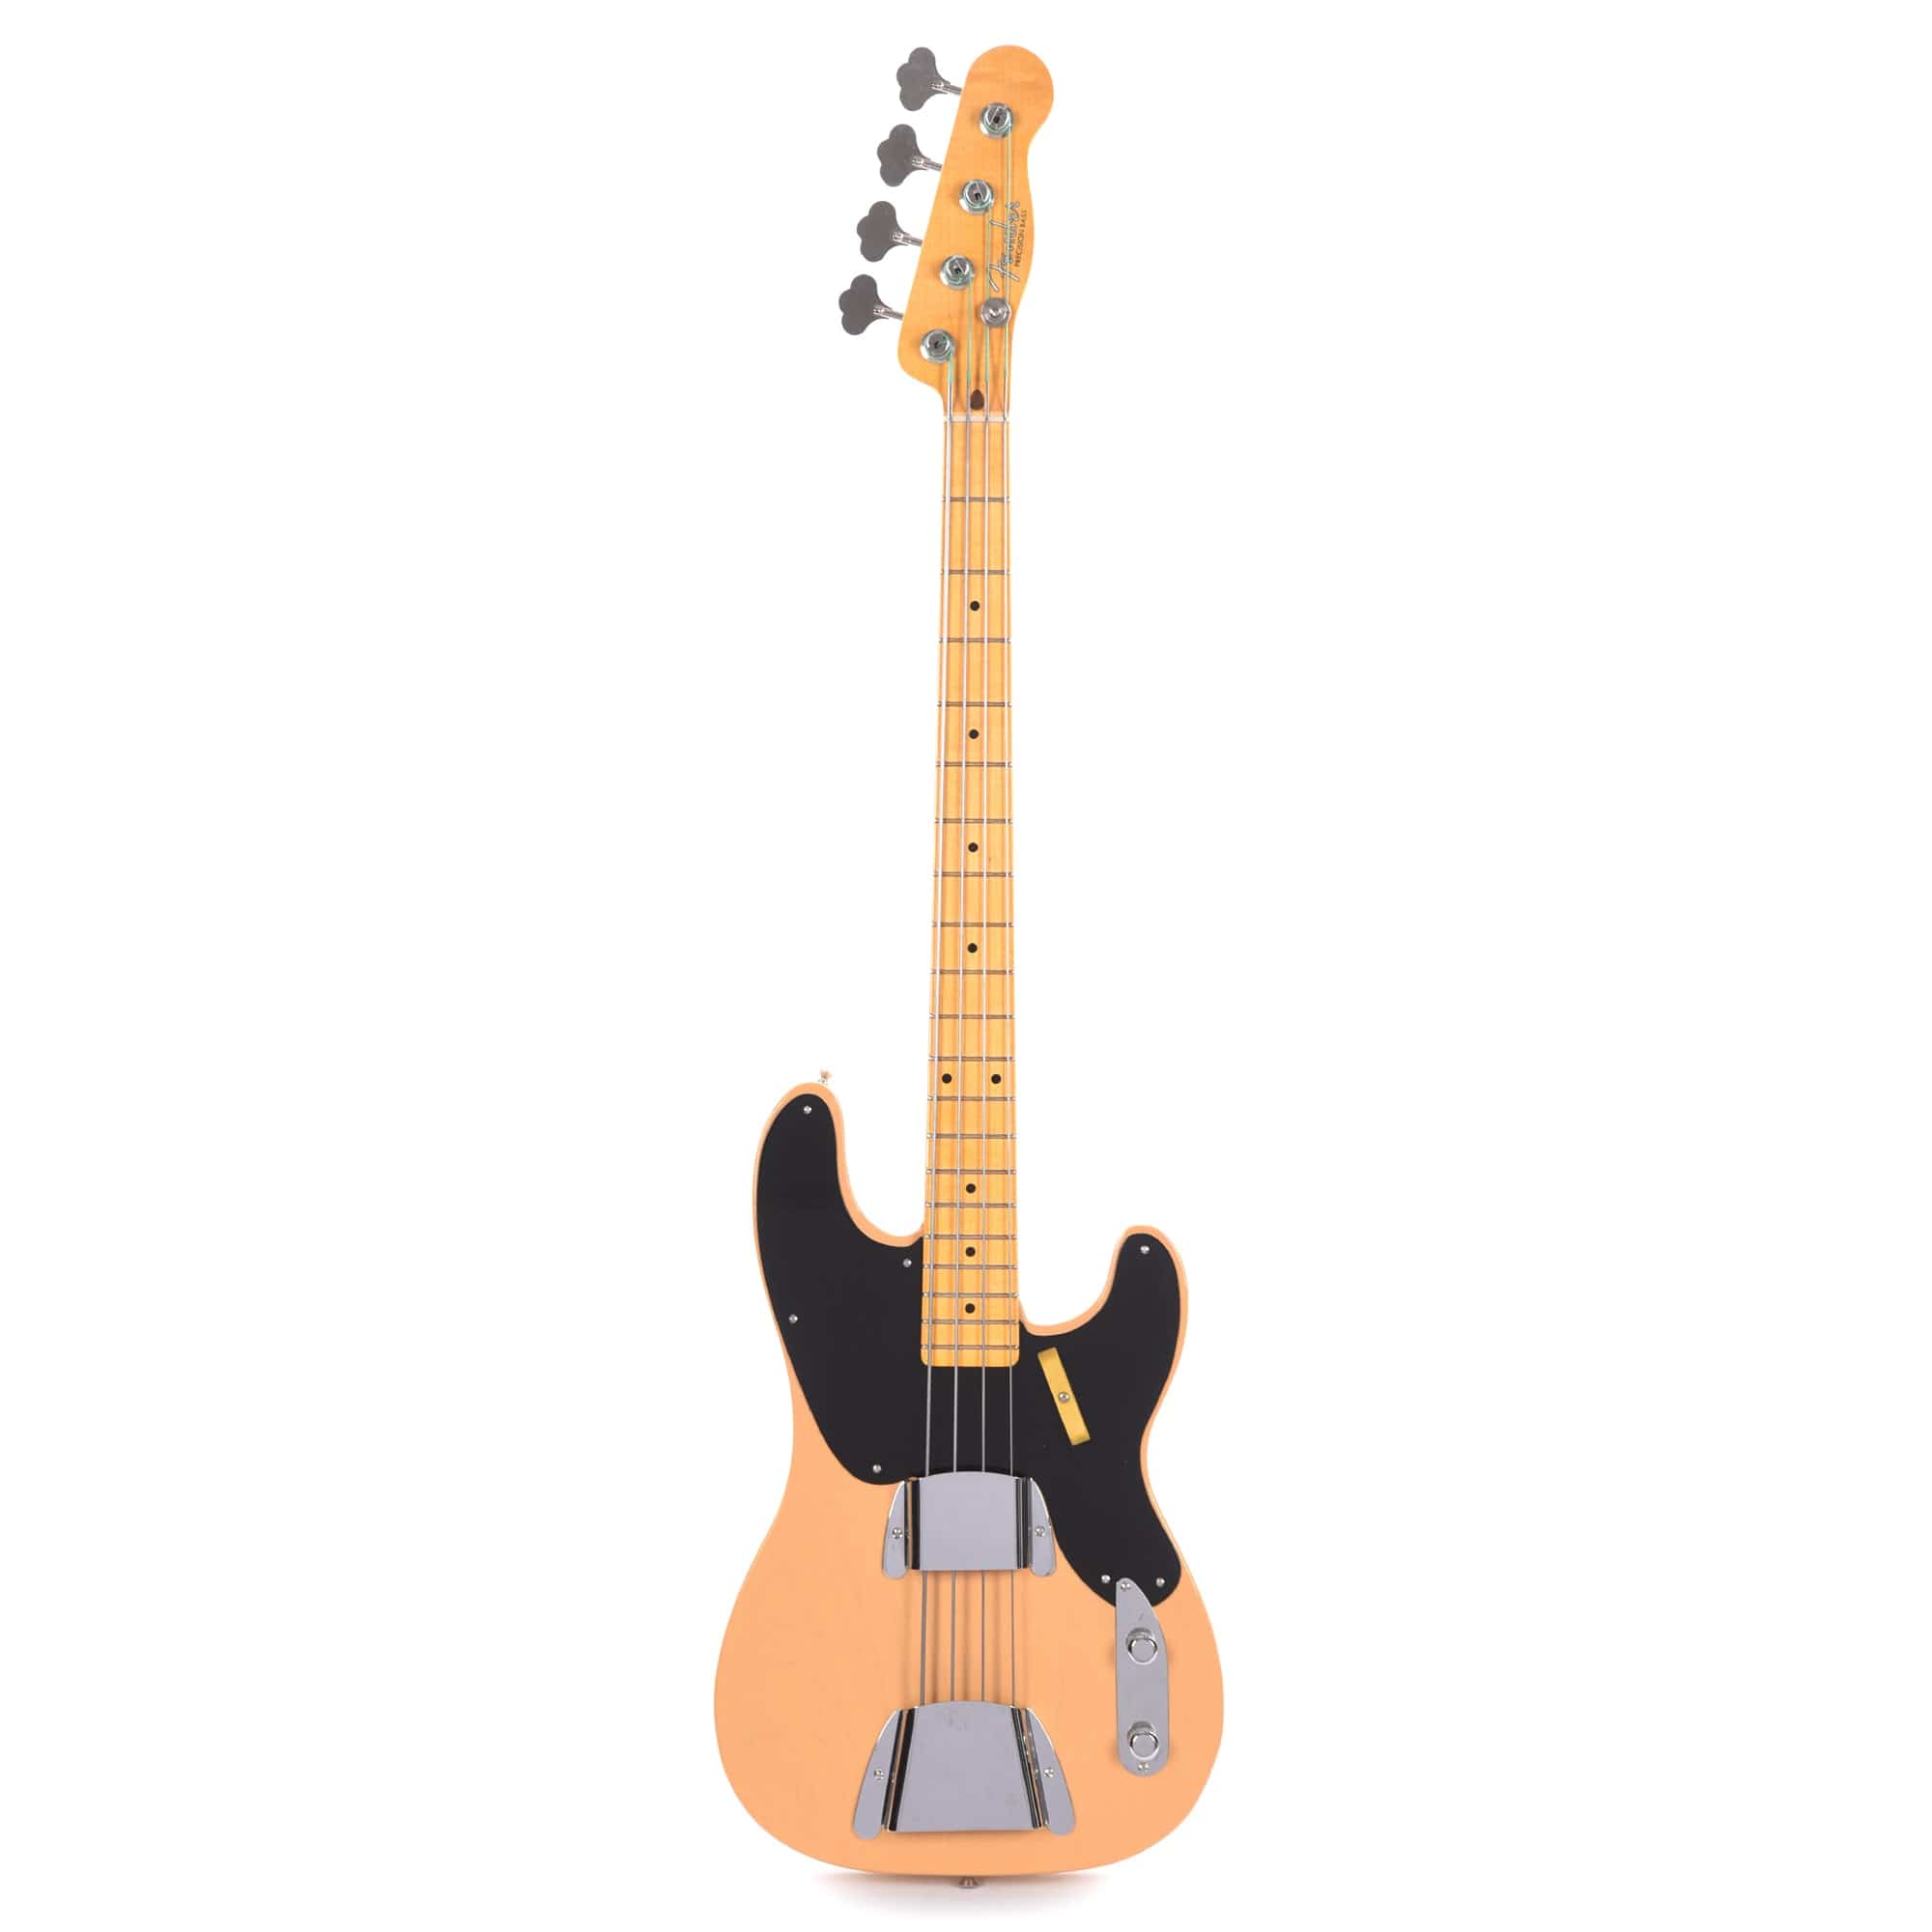 Fender Custom Shop Limited Edition 1951 Precision Bass Deluxe Closet Classic Nocaster Blonde Electric Guitars / Solid Body